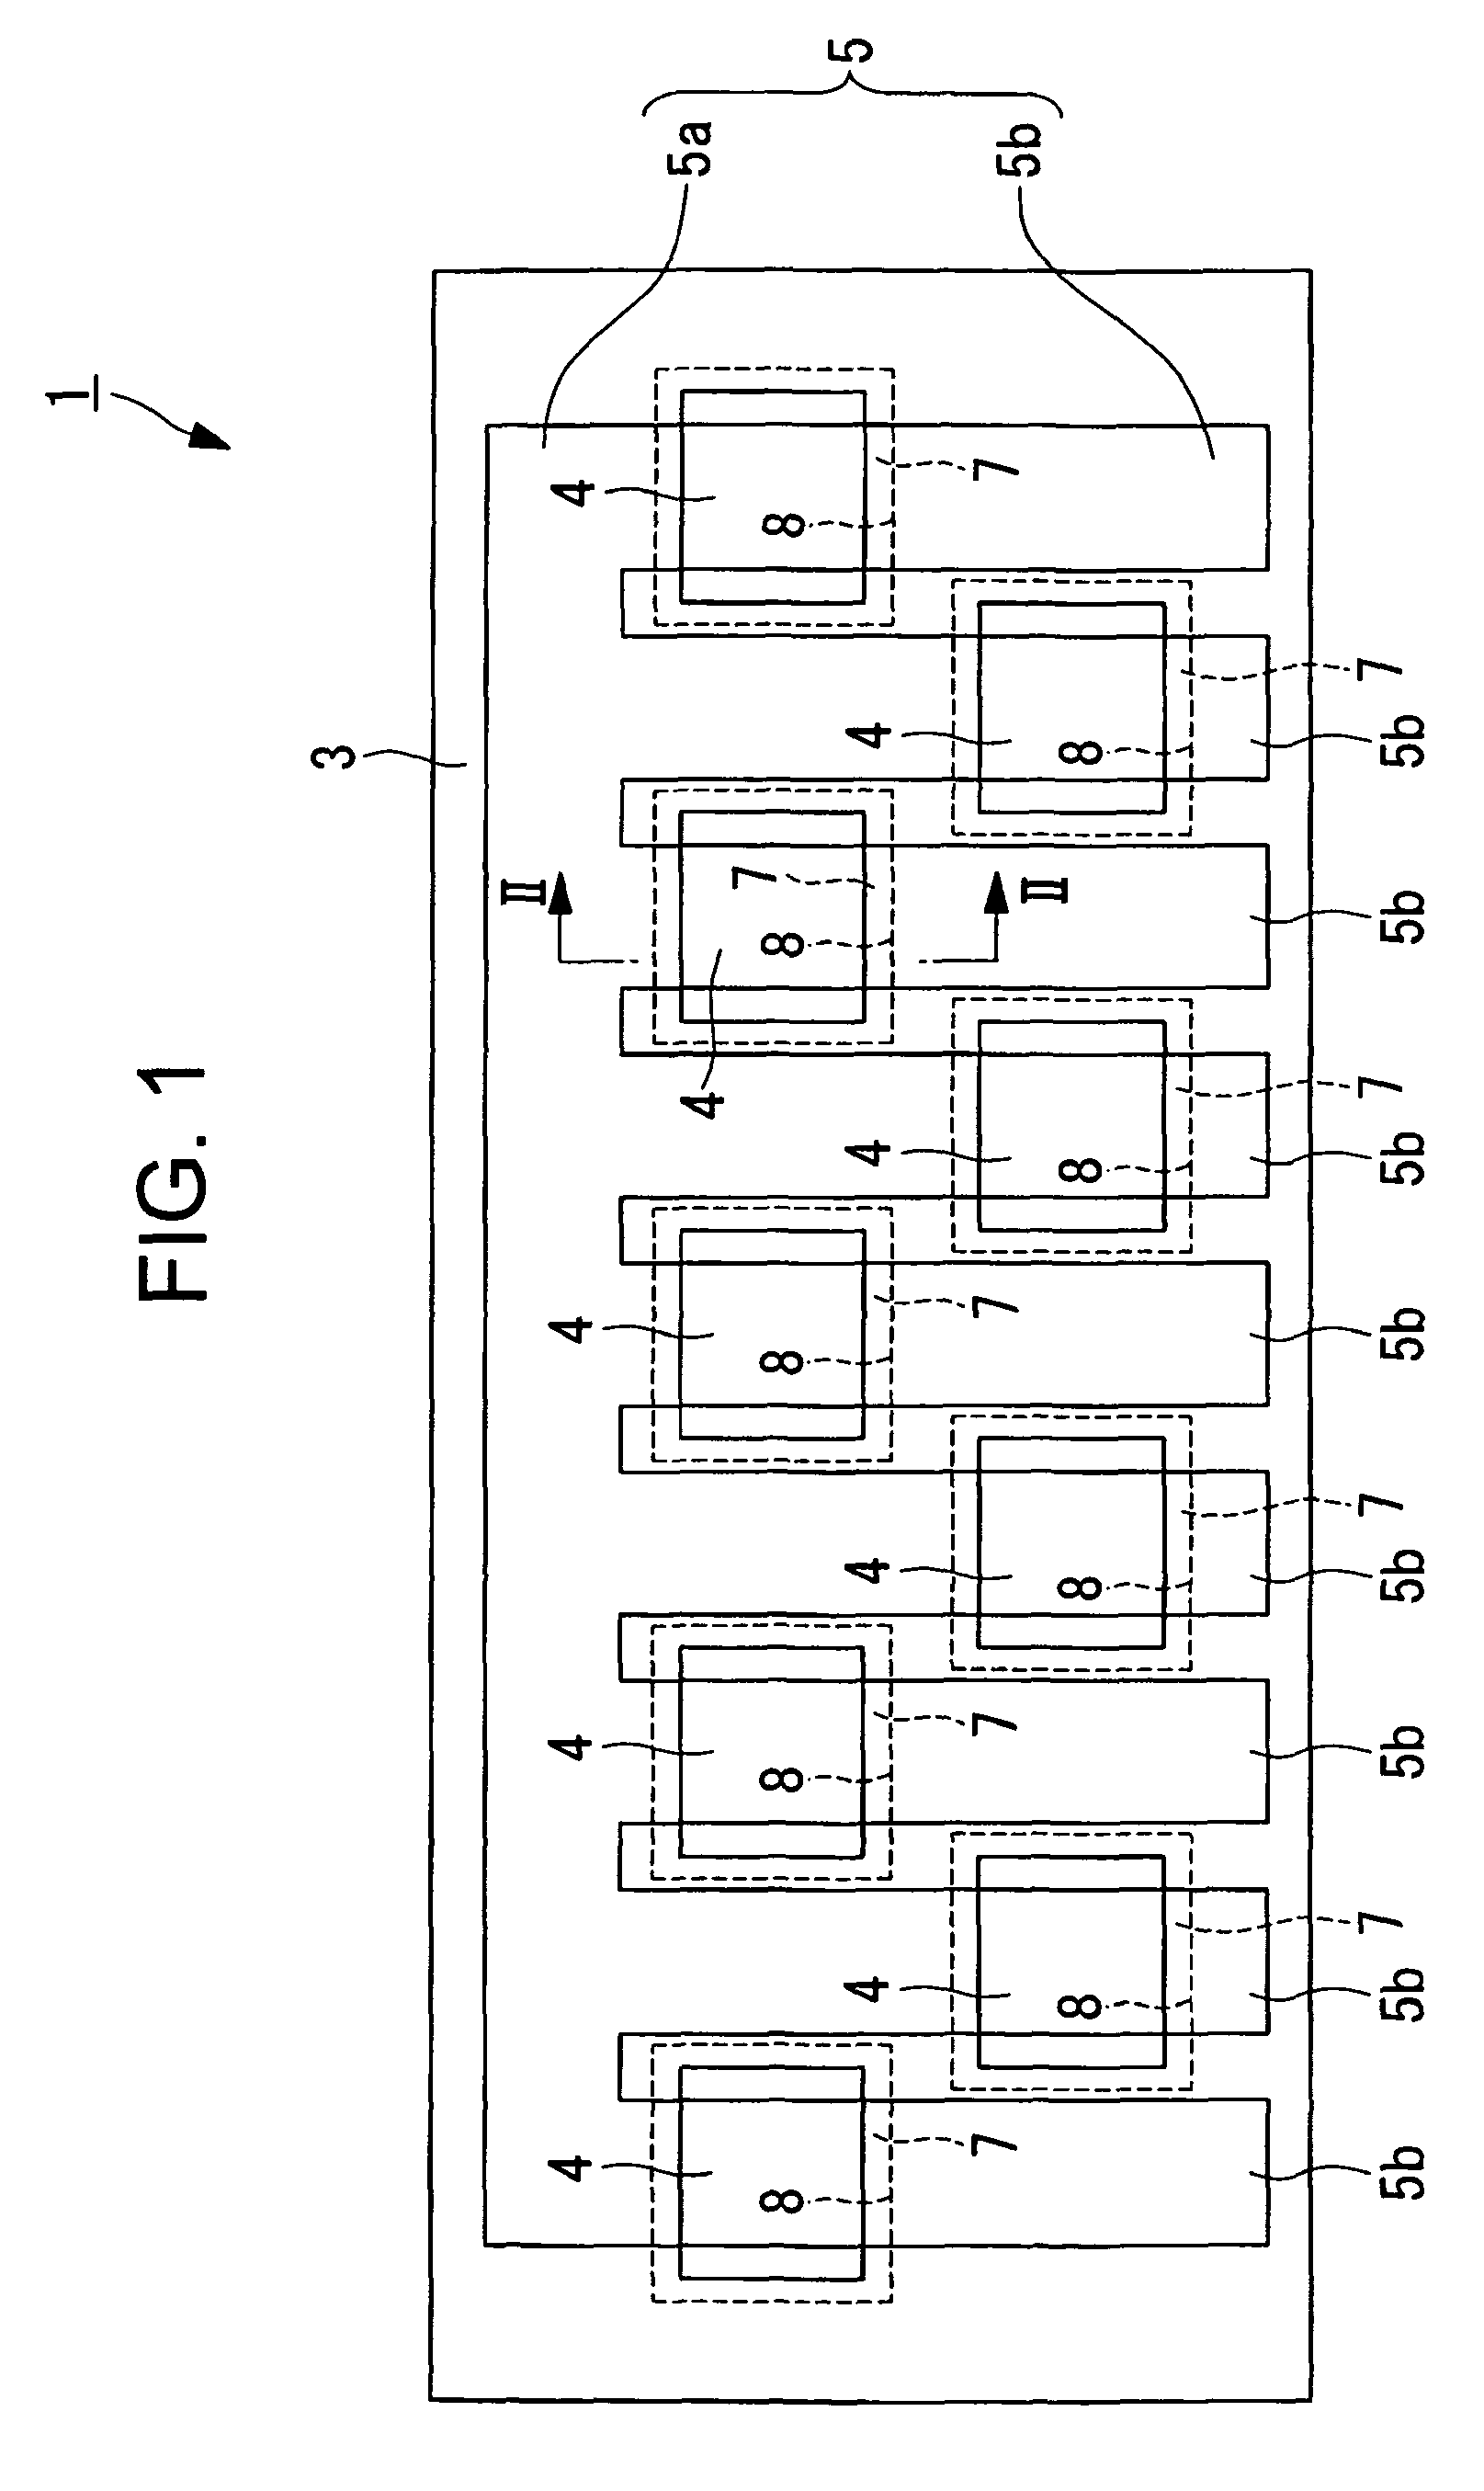 Heating resistance element component and printer